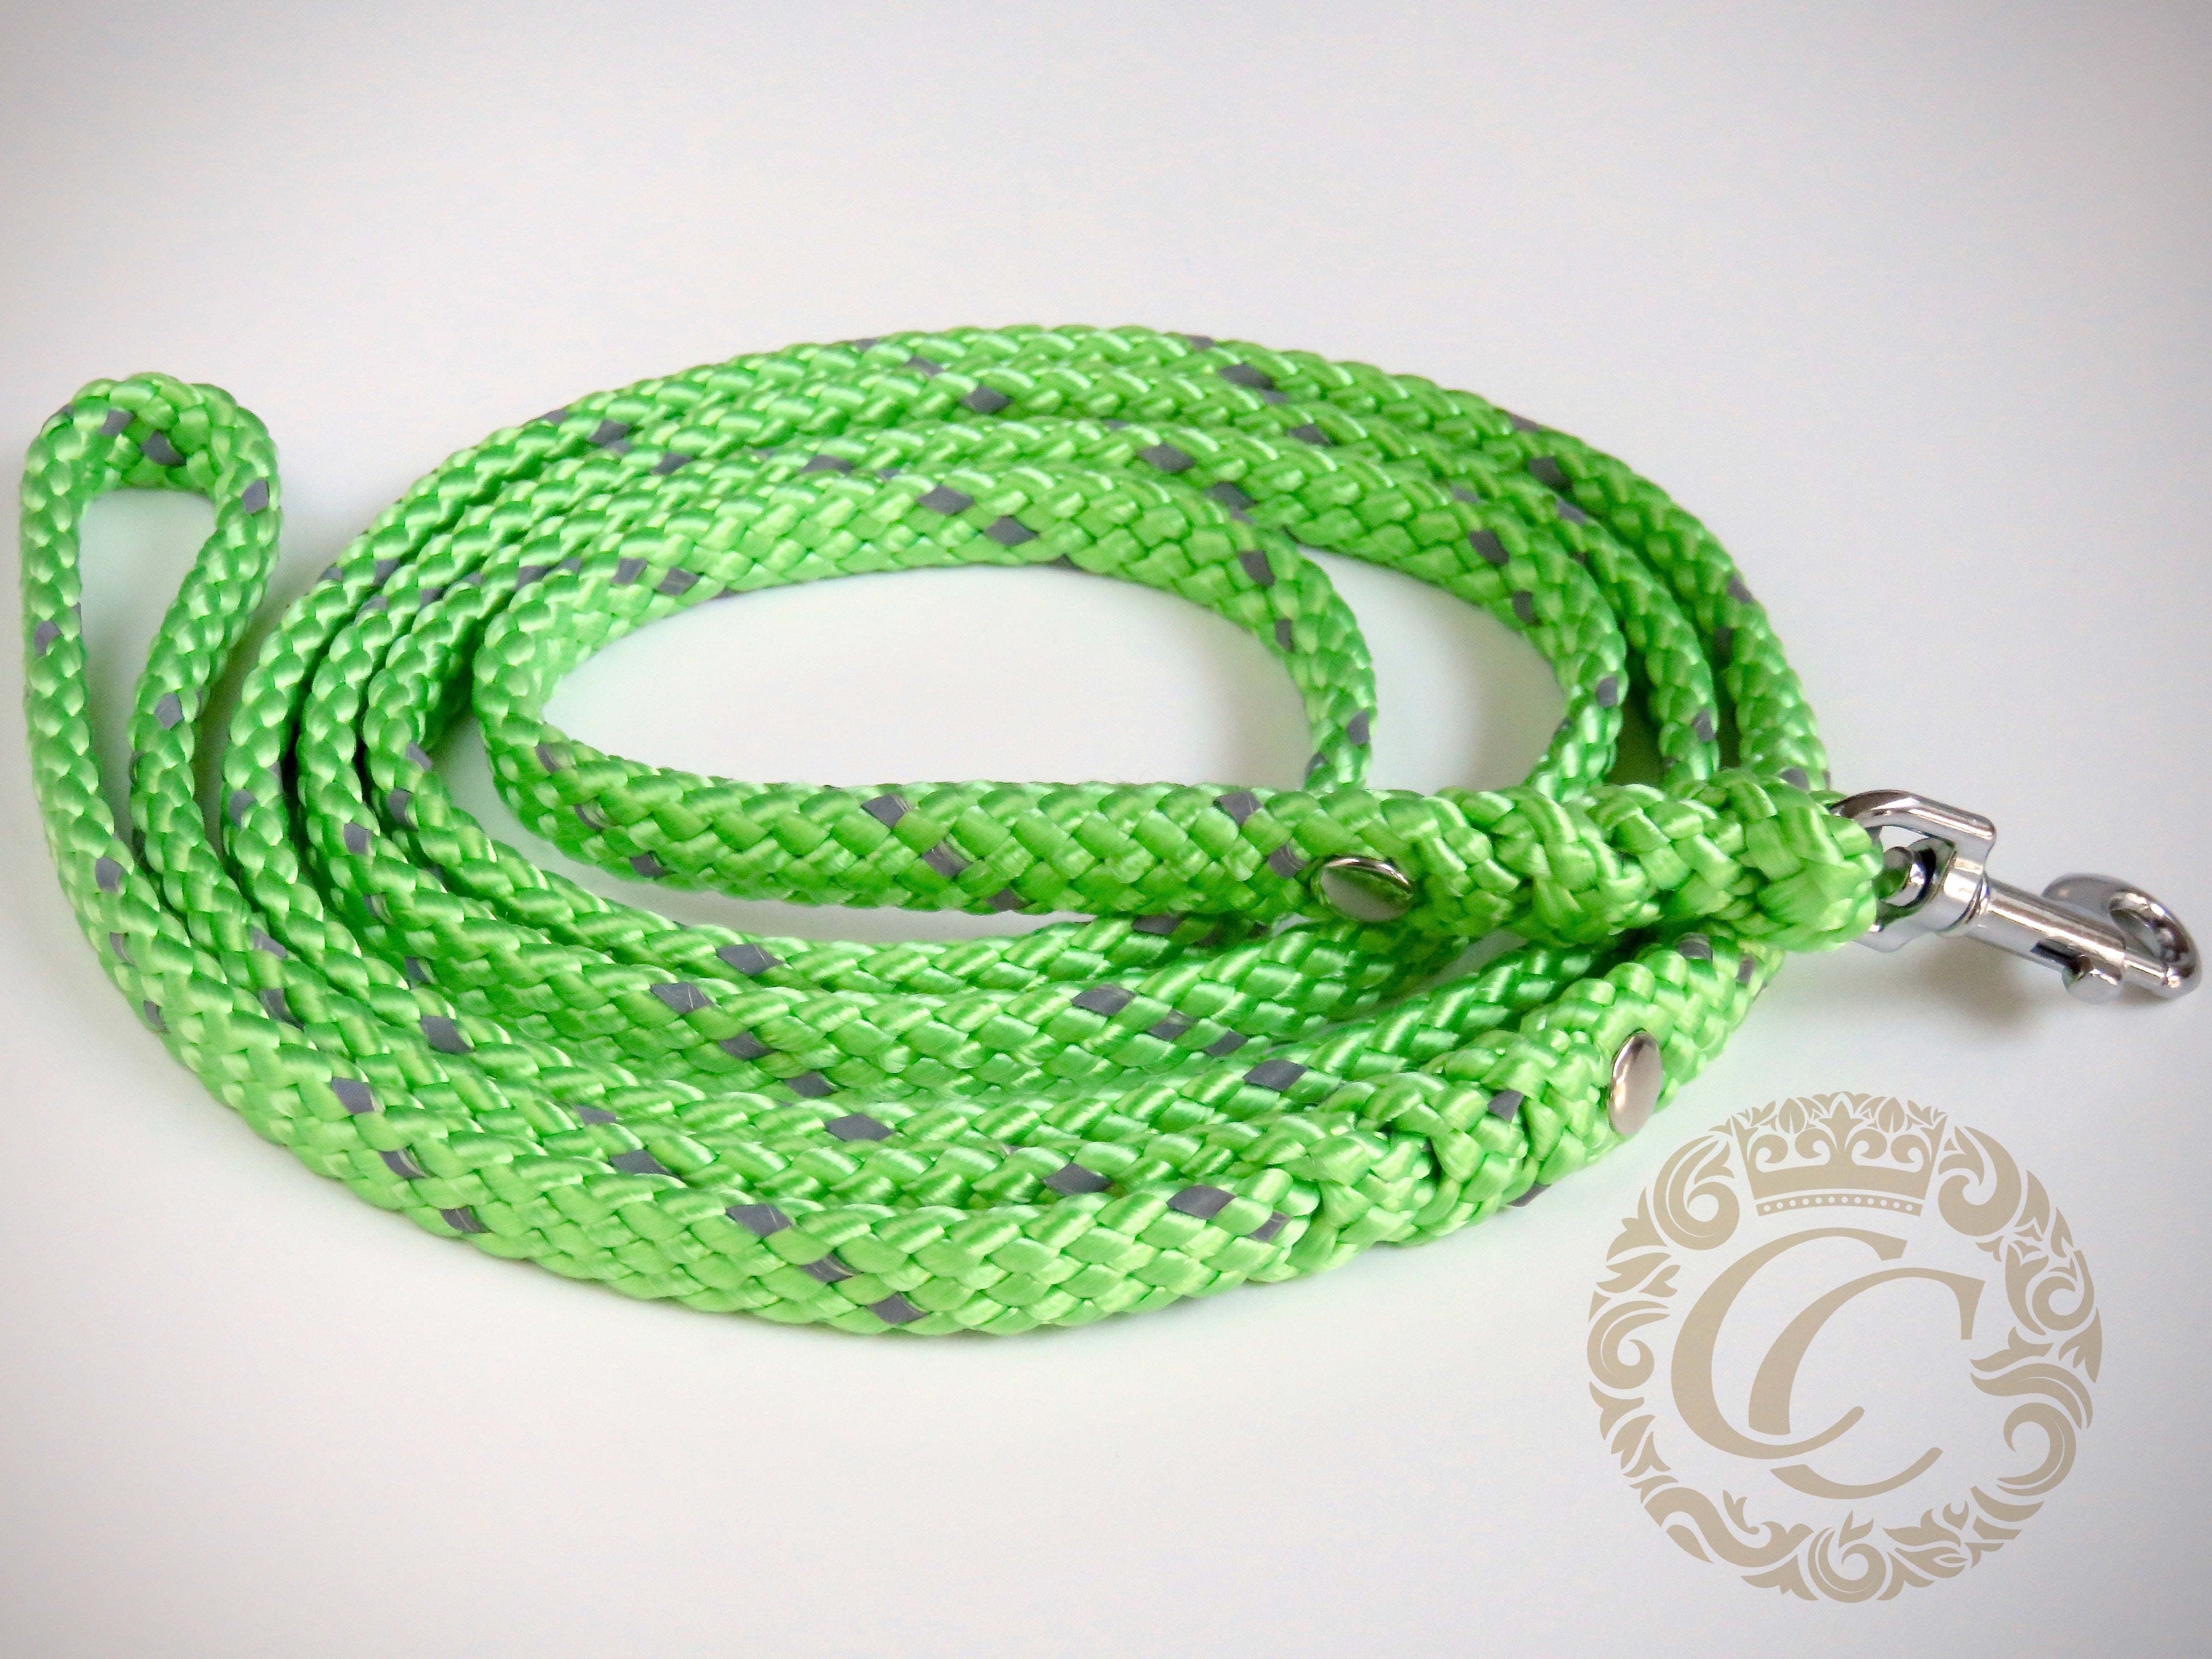 Dog leash for small & medium dogs Reflective Green |  CollarCrafts dog leashes and collars | Dog leash paracord | Dog leash washable |  Green dog lead |  Mini dog leashes | Green reflective paracord leash |  dog lead |  Custom made leashes |  Small dog leash |  Apple green collar leash set